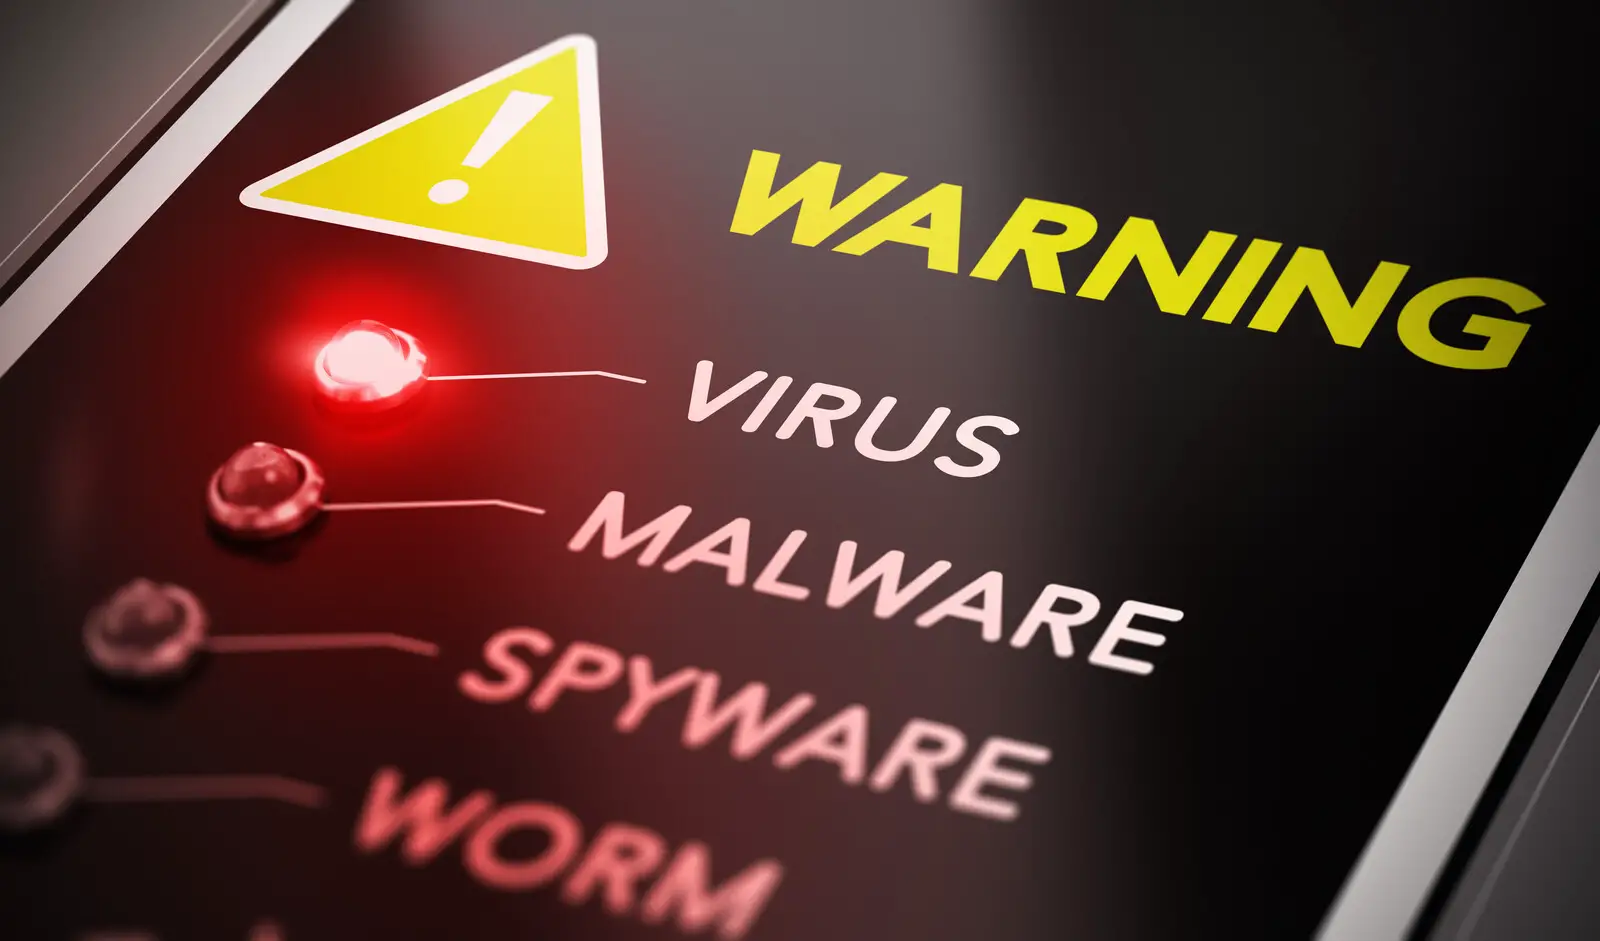 Close up of a control panel with warning in yellow at the top with a triangle with an exclamation mark in the middle, followed by a list with Virus, malware, spyware, and worm. the light next to virus is lit up